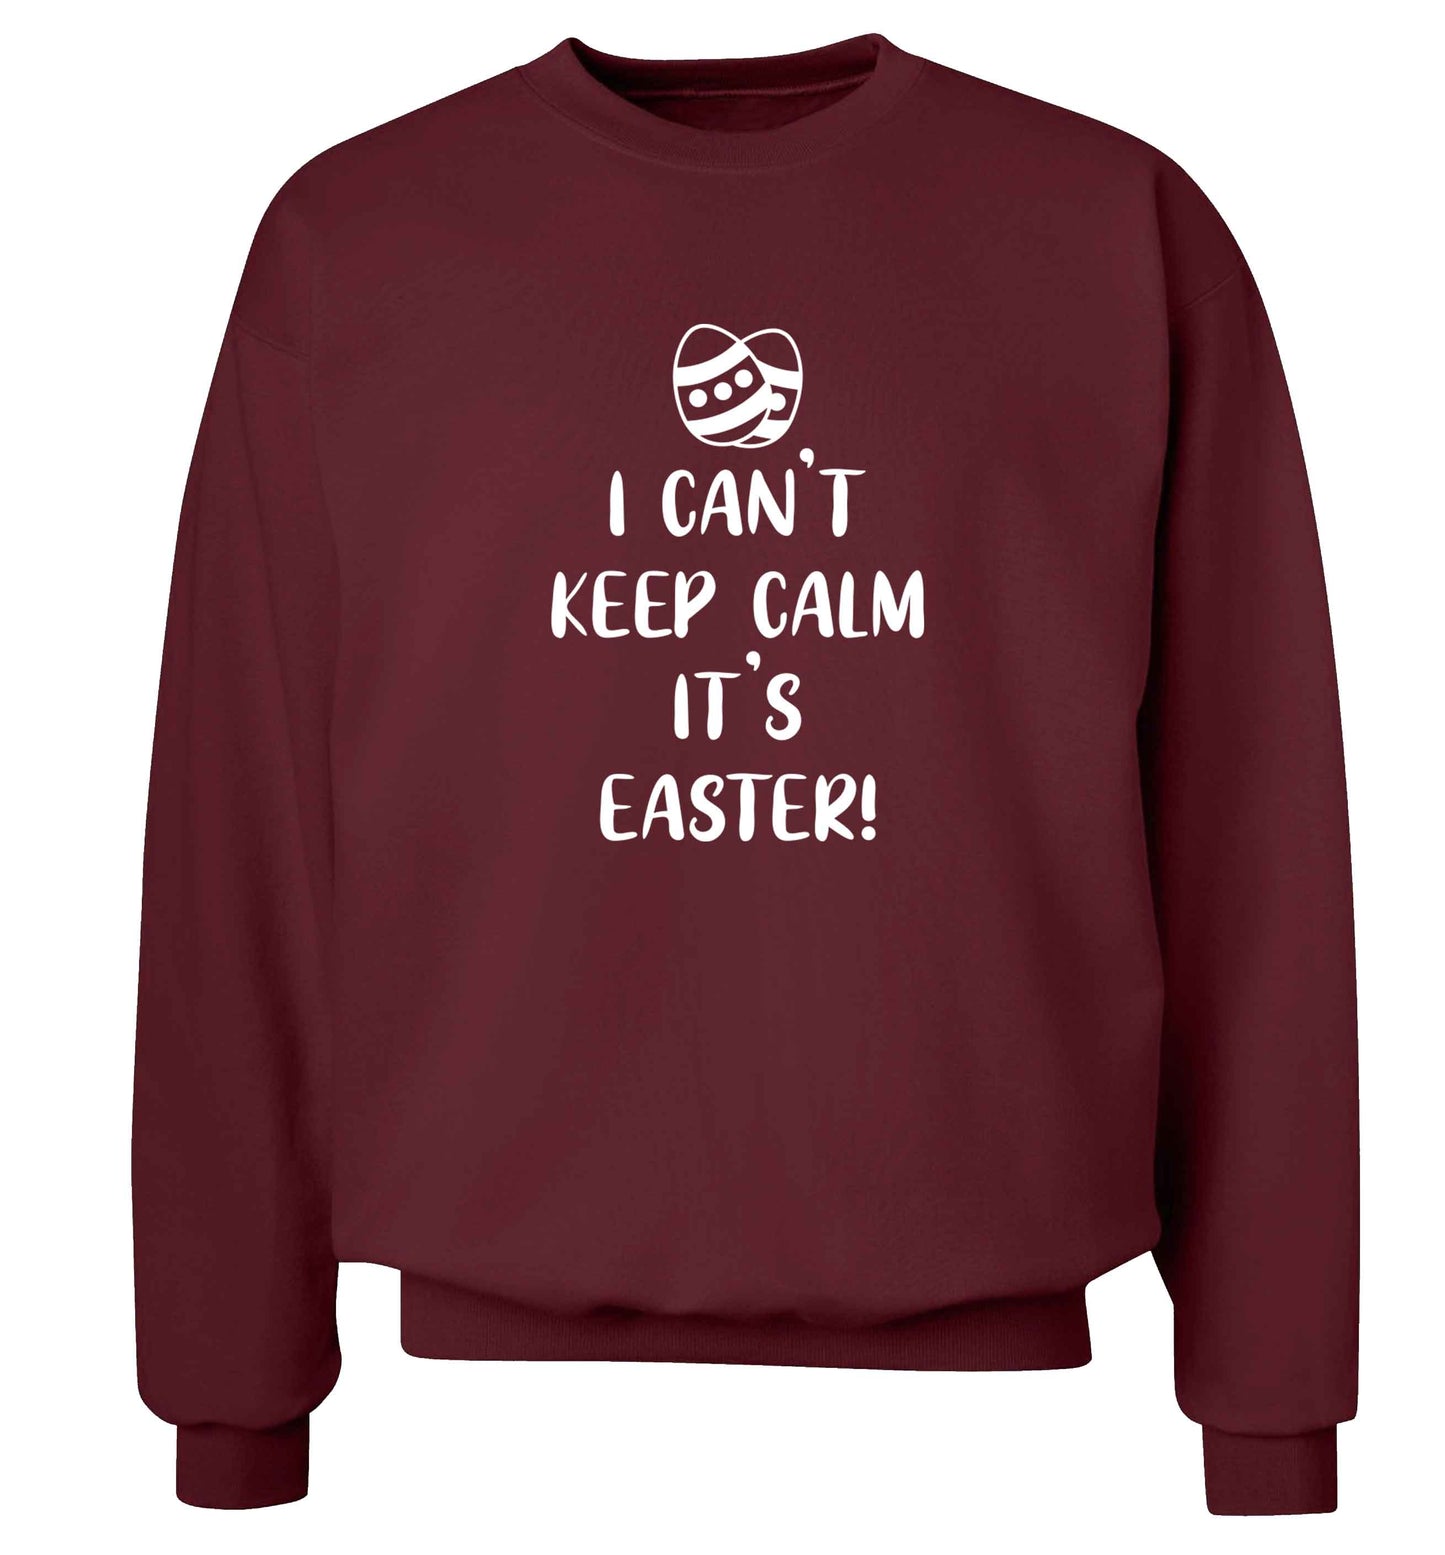 I can't keep calm it's Easter adult's unisex maroon sweater 2XL